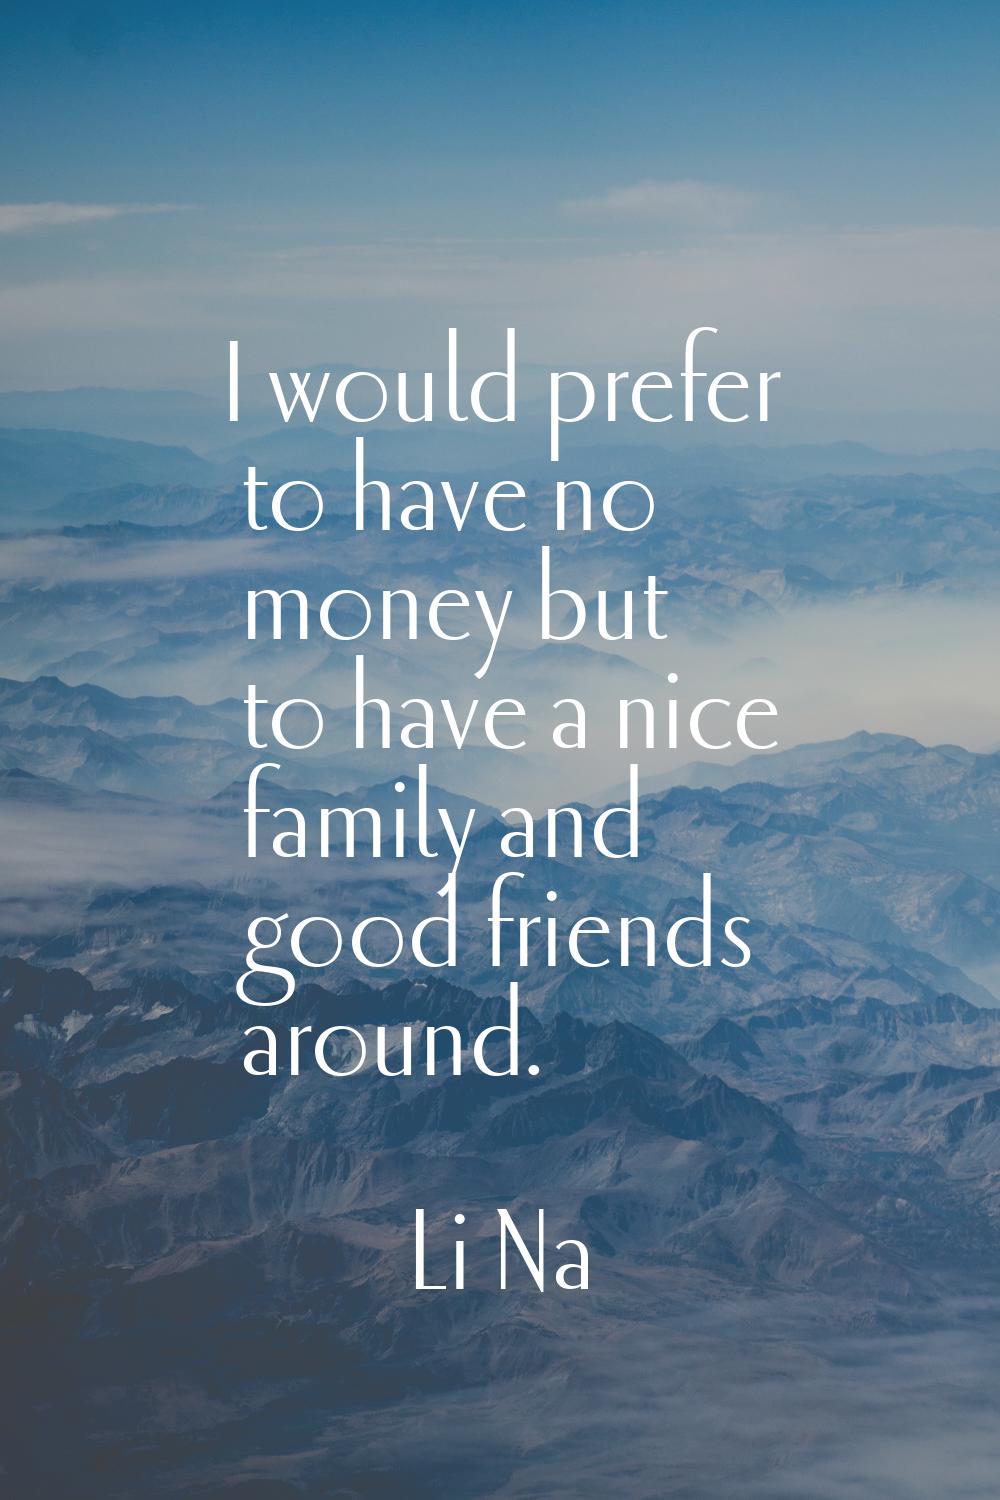 I would prefer to have no money but to have a nice family and good friends around.